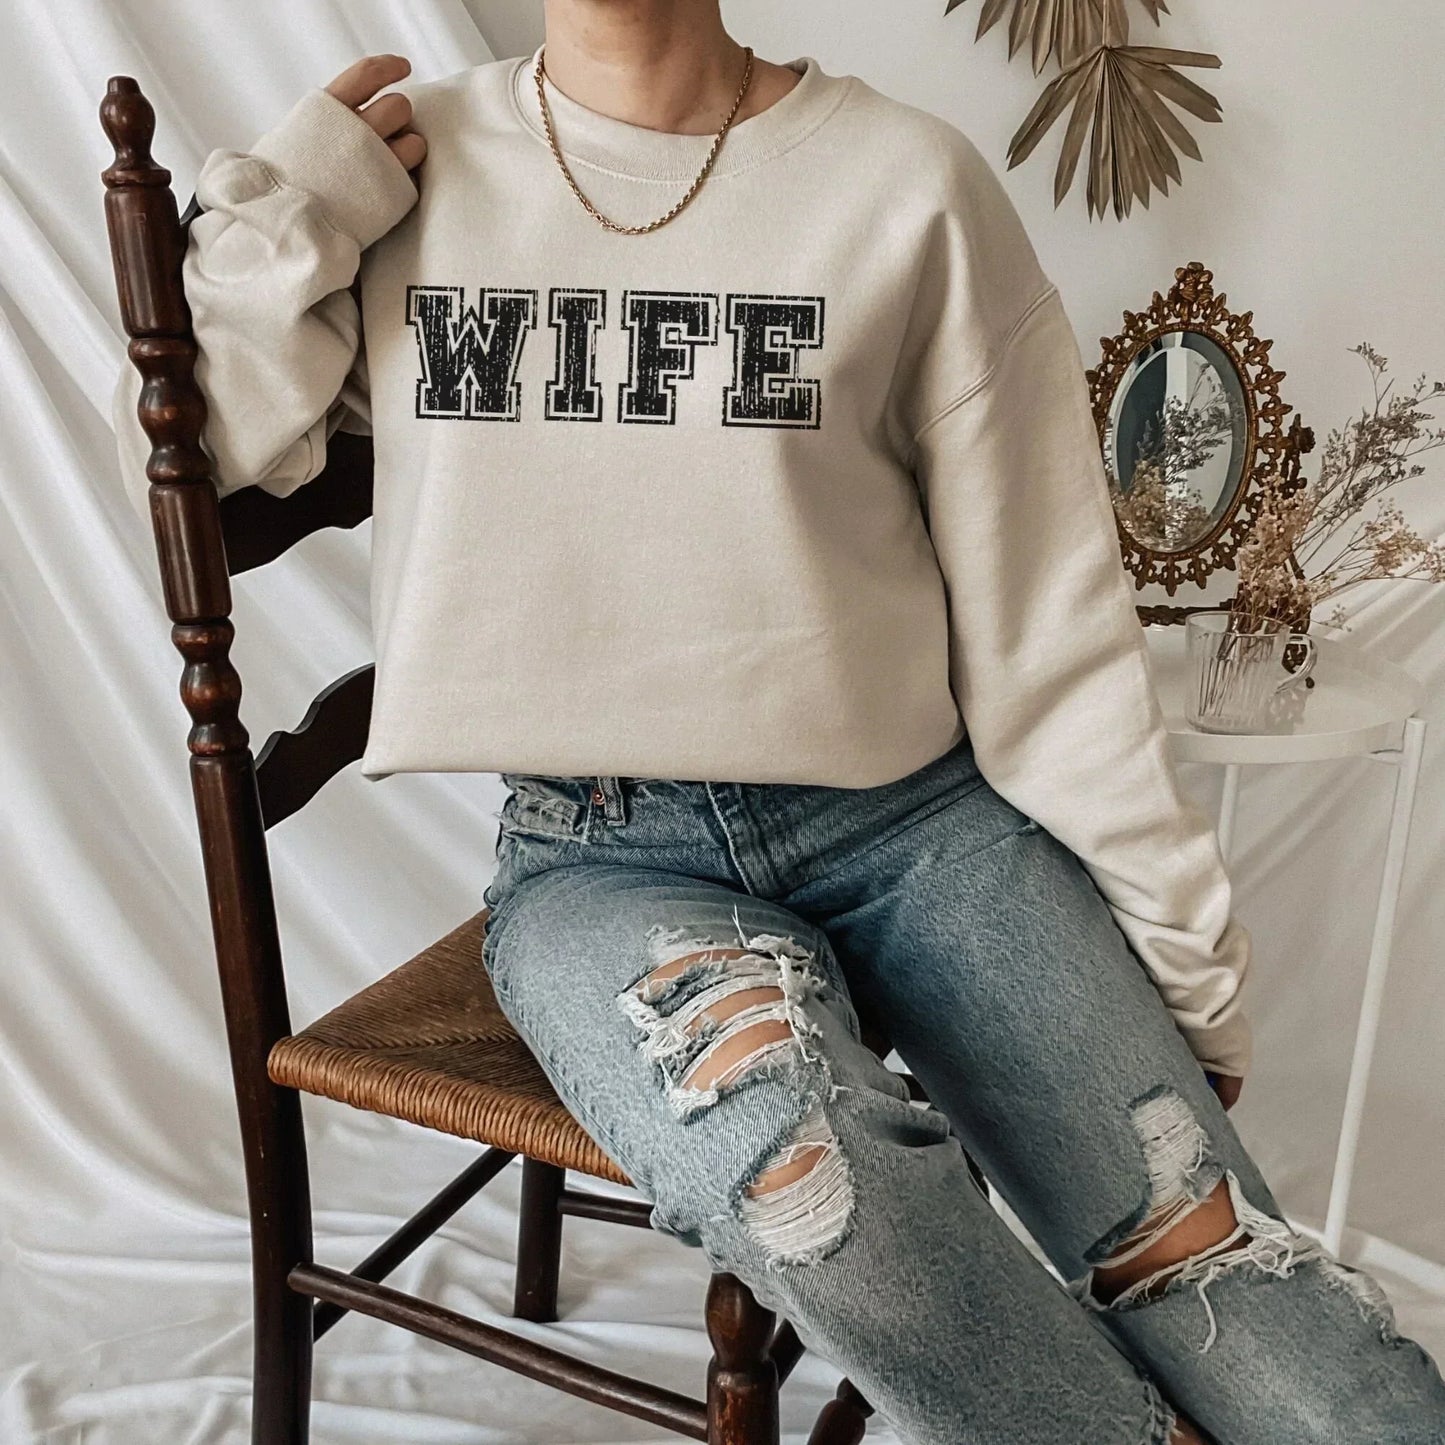 Wife Sweatshirt, Newly Married Sweater, Getting Ready Outfit, Future Mrs, Team Bride Shirt, Wife Hoodie, Gift for Bride, Crewneck Sweater